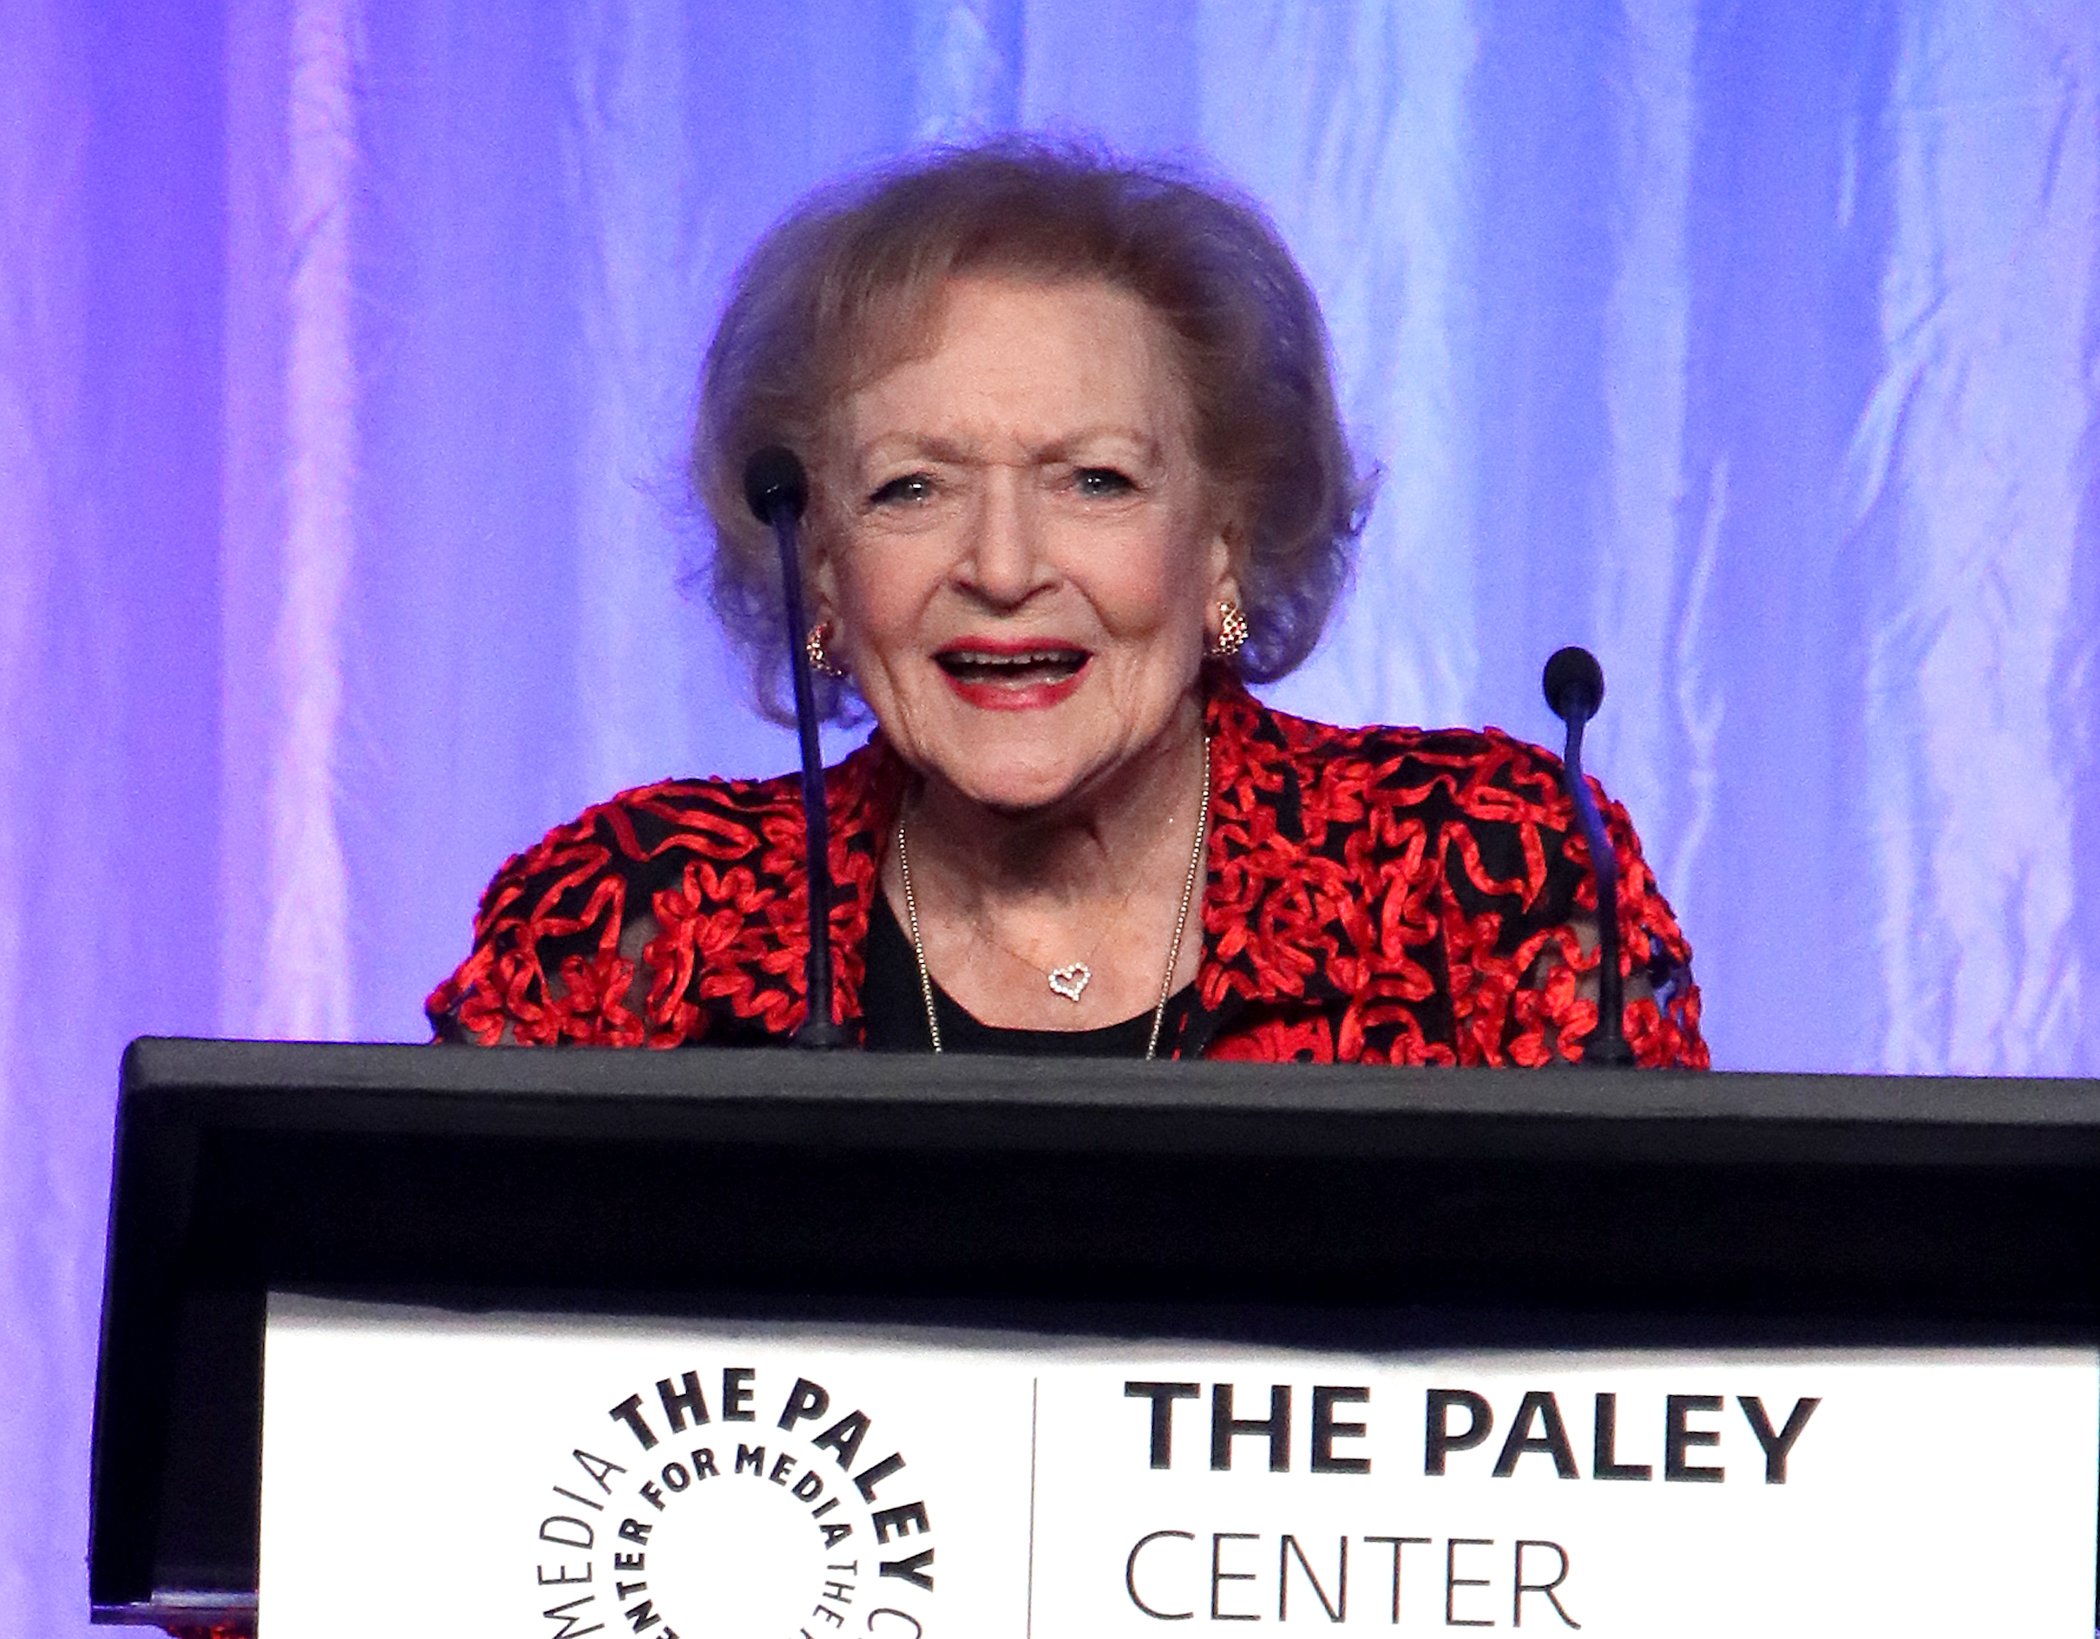 Betty White speaking at the Paley Honors in Hollywood against a purple background